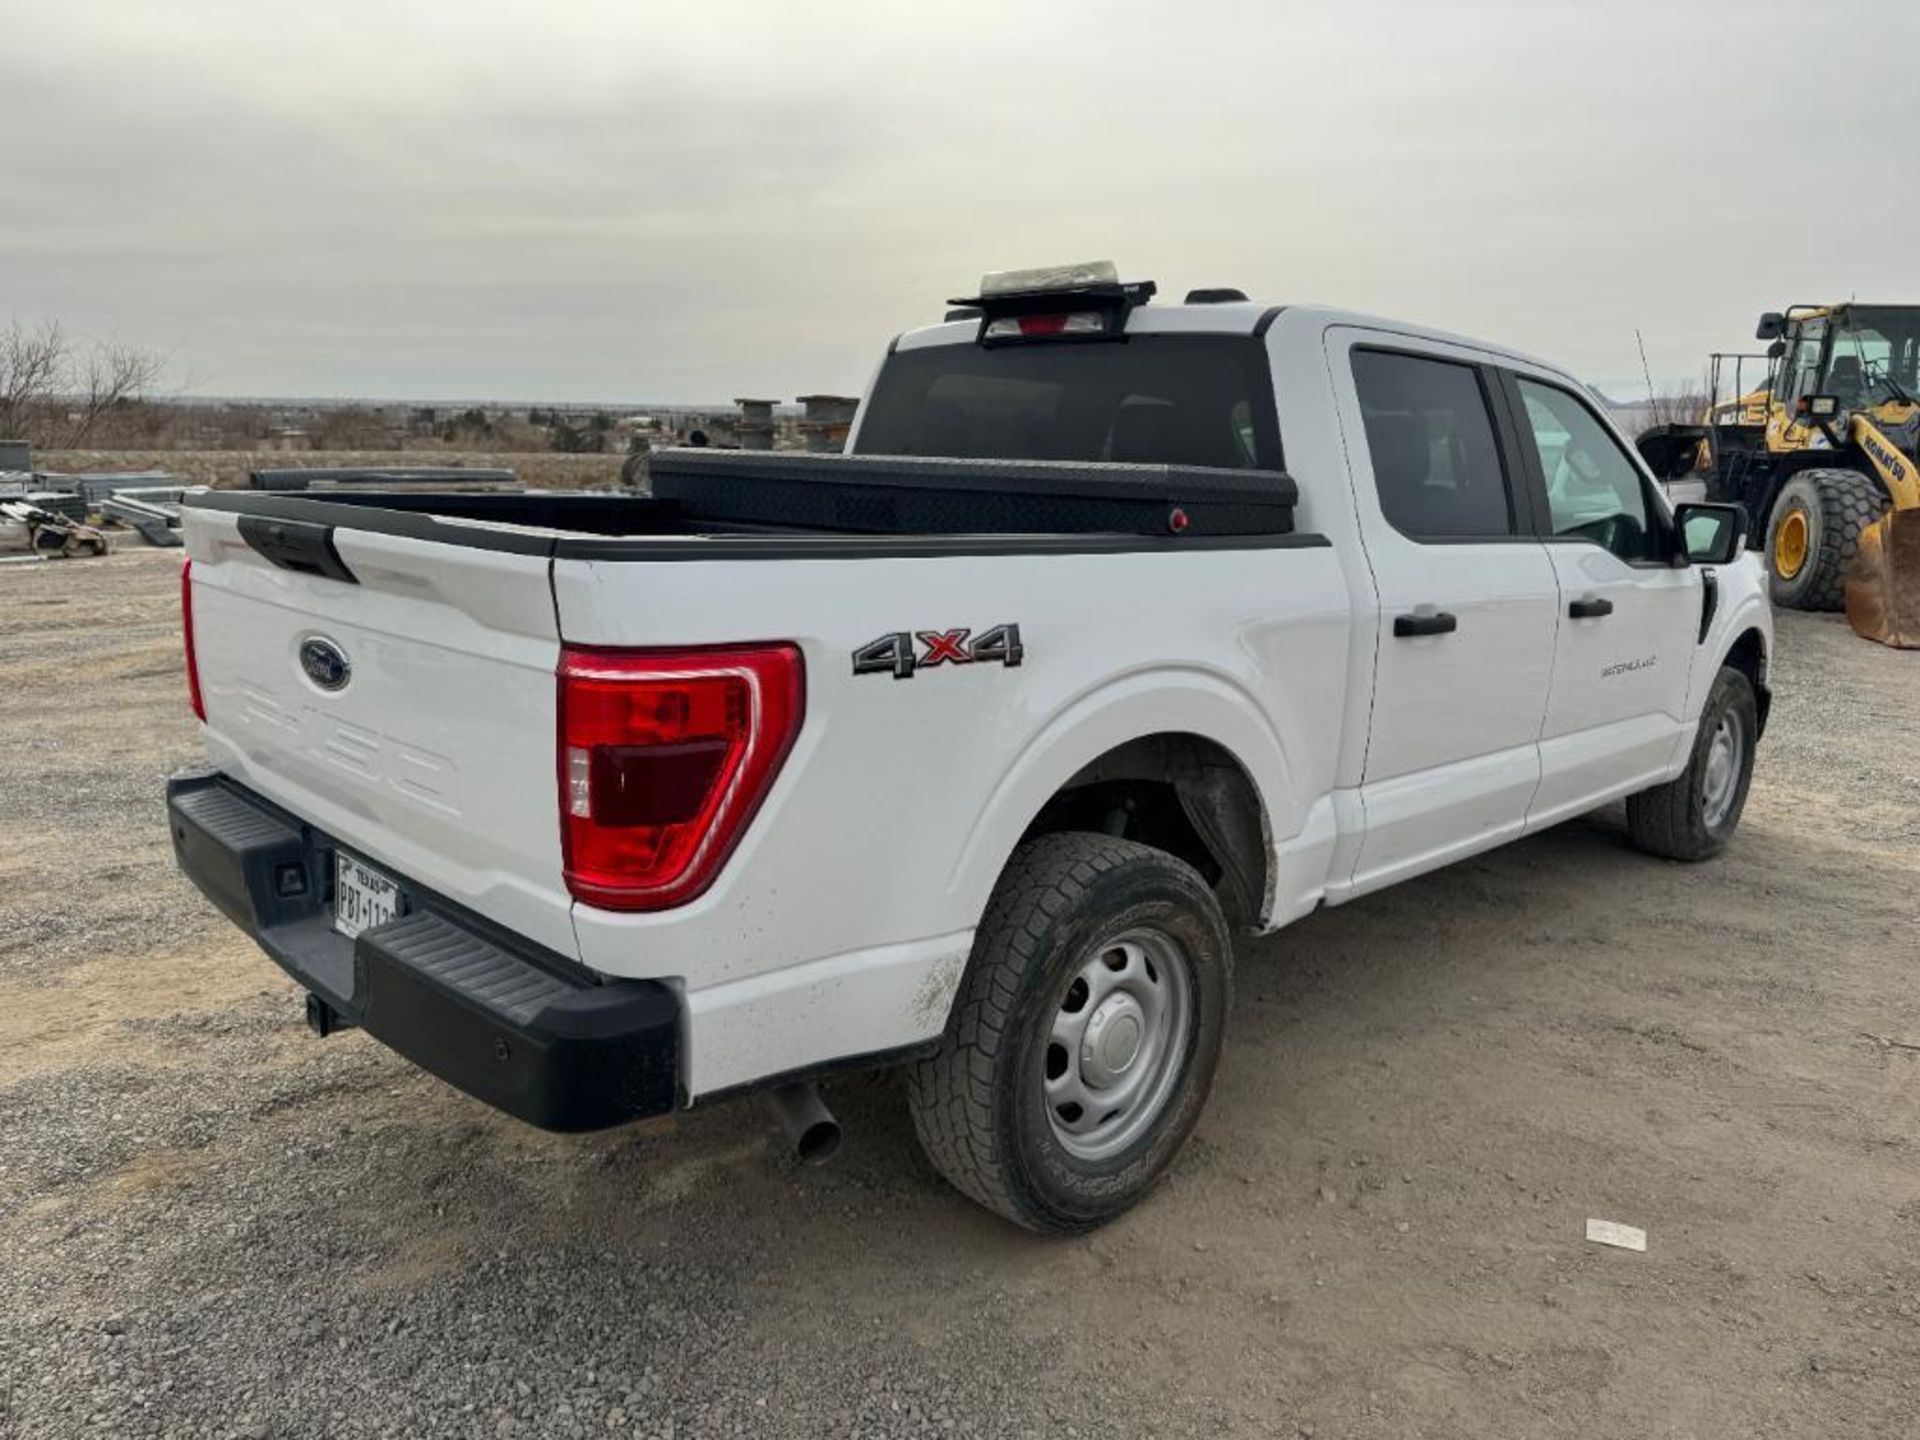 2021 Ford F150 XL Crew Cab 4X4 Truck - Image 4 of 19